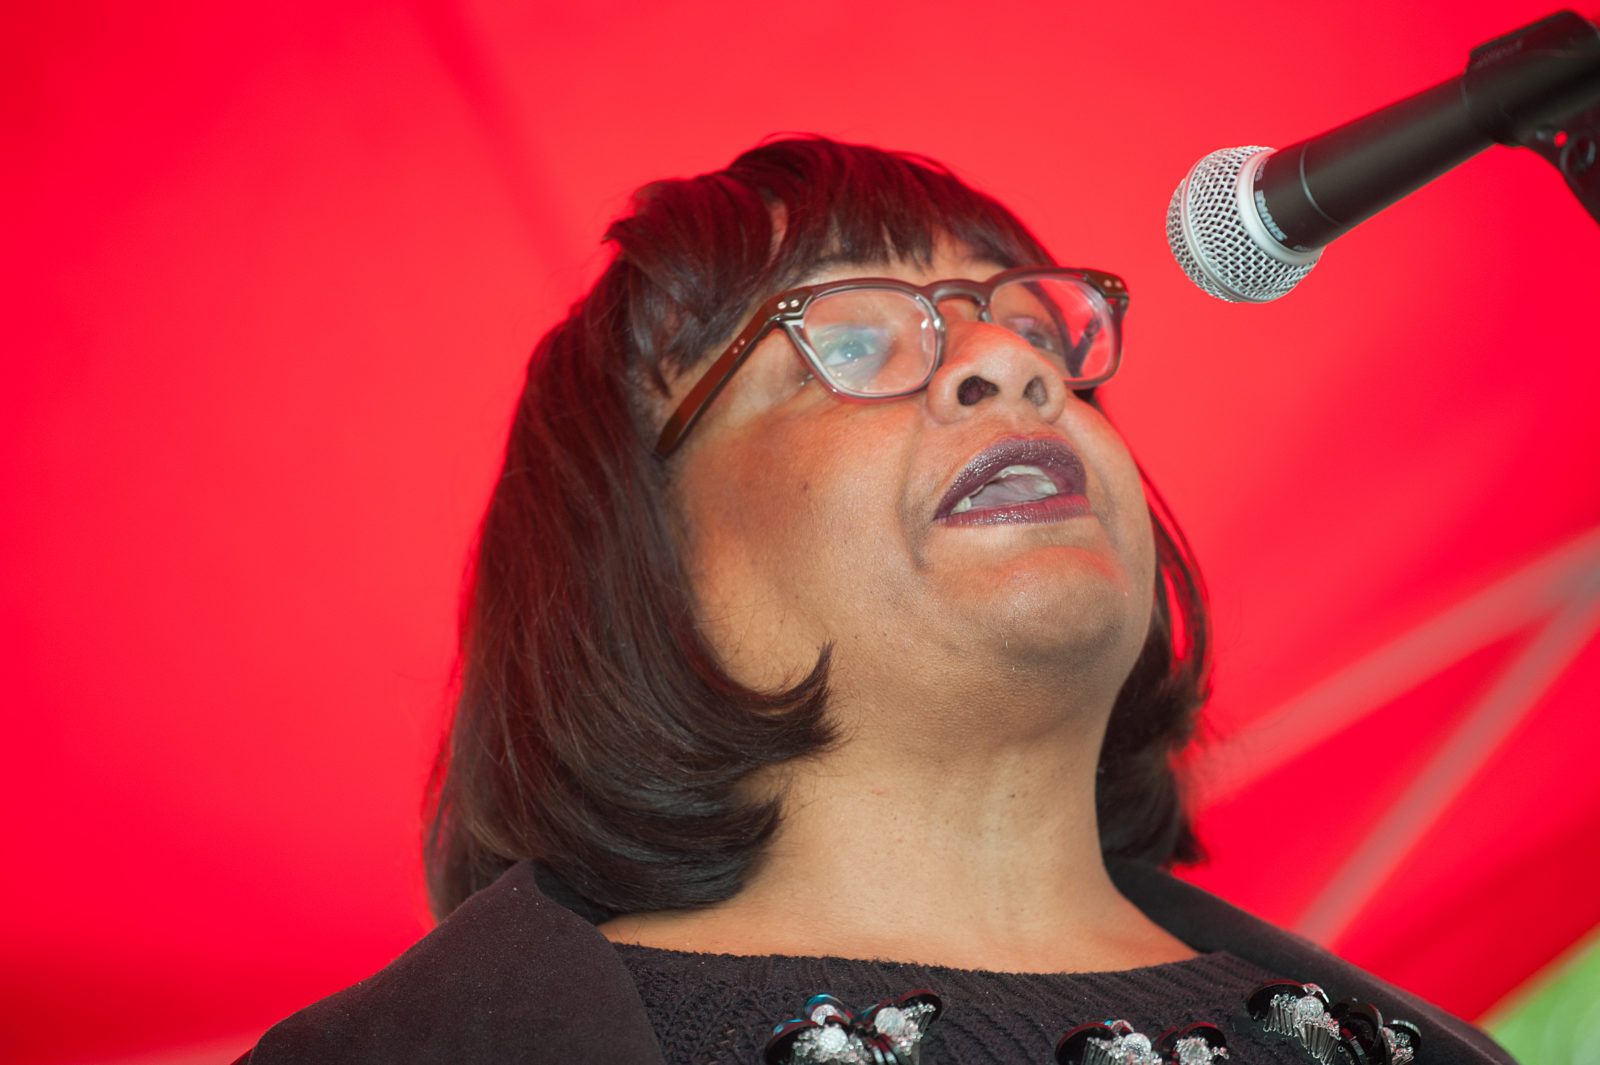 Police called to McDonald’s after 4 hour standoff between Diane Abbott and a server who asked if she’d like fries